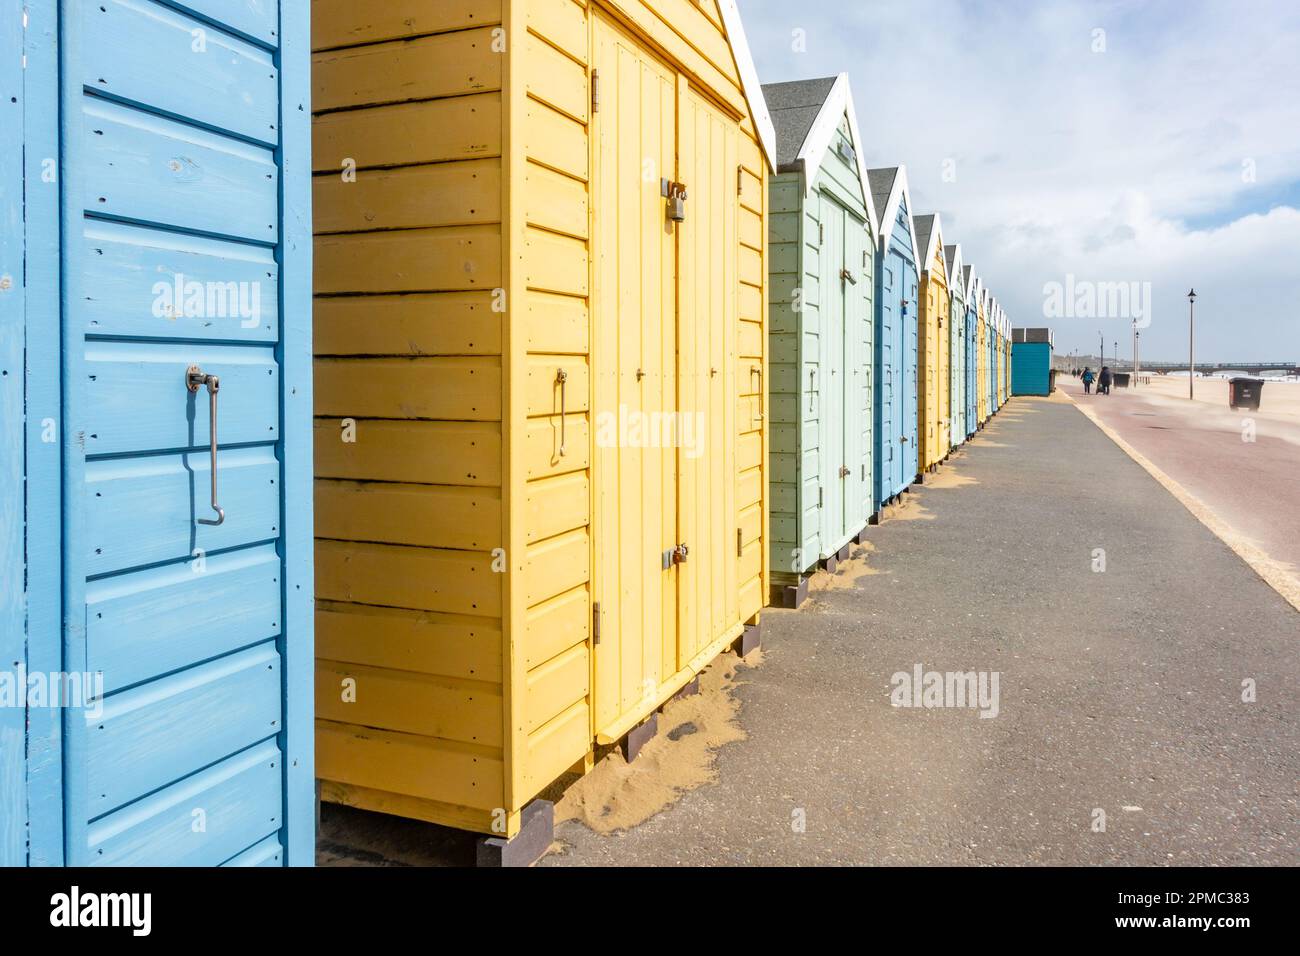 A path in front of beach huts on Bournemouth Beach in Dorset, UK under a stormy, grey sky with sand blowing in the wind Stock Photo